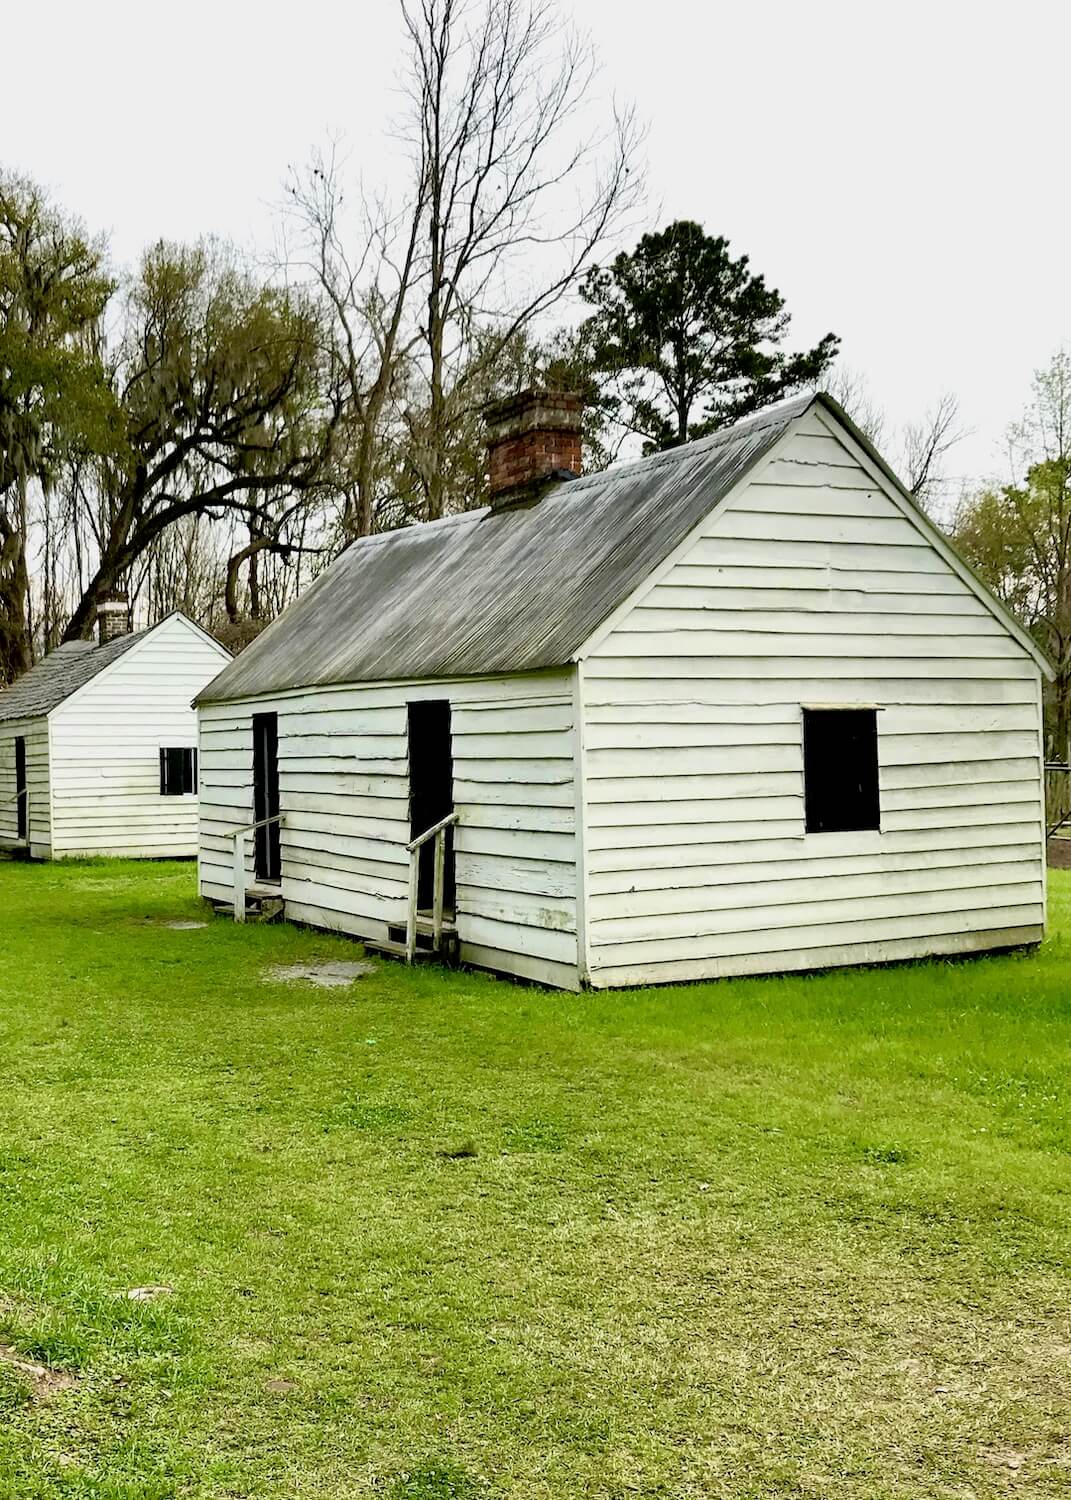 Two simple cabins that stand to represent the housing conditions of slaves on a rice plantation near Charleston, SC.  The rectangular buildings are made of white painted narrow wood planks and variegated gray sheet metal with a simple red brick chimney in the middle.  There are a few dark openings for window areas and two doorways in the front with steps leading to the green grassy area outside.  